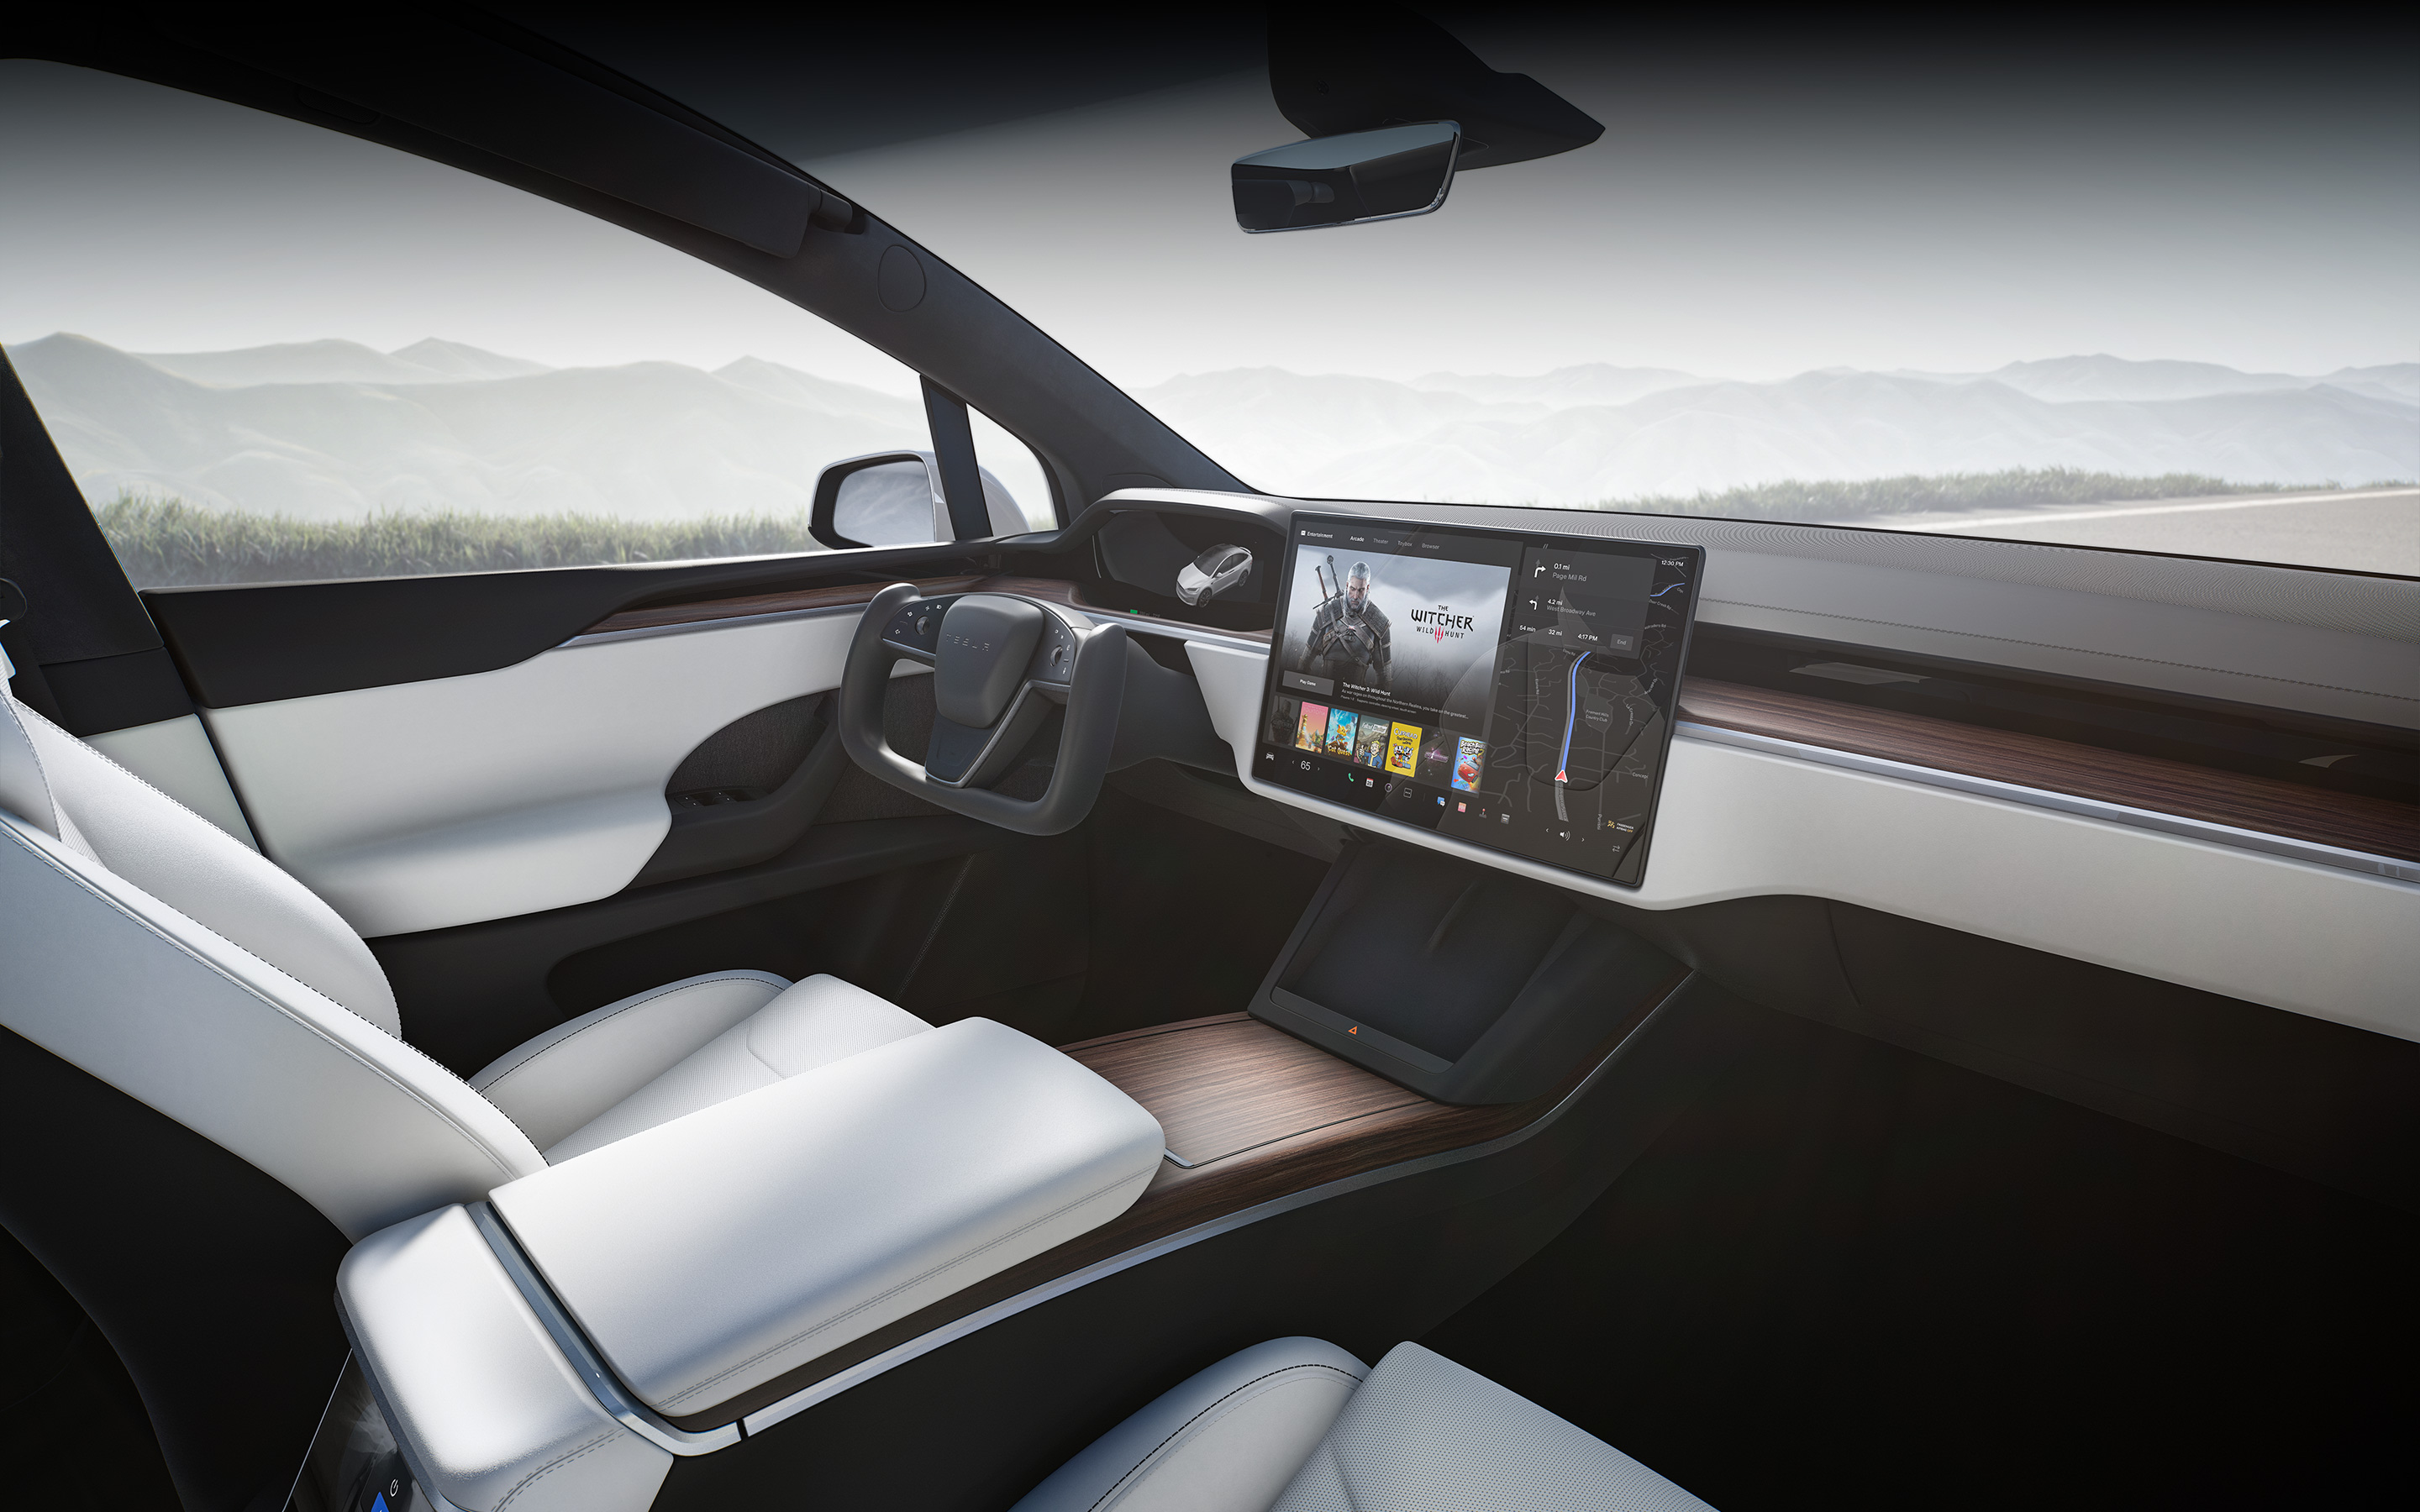 Model X with white interior from the passenger seat point of view with focus on the infotainment touchscreen